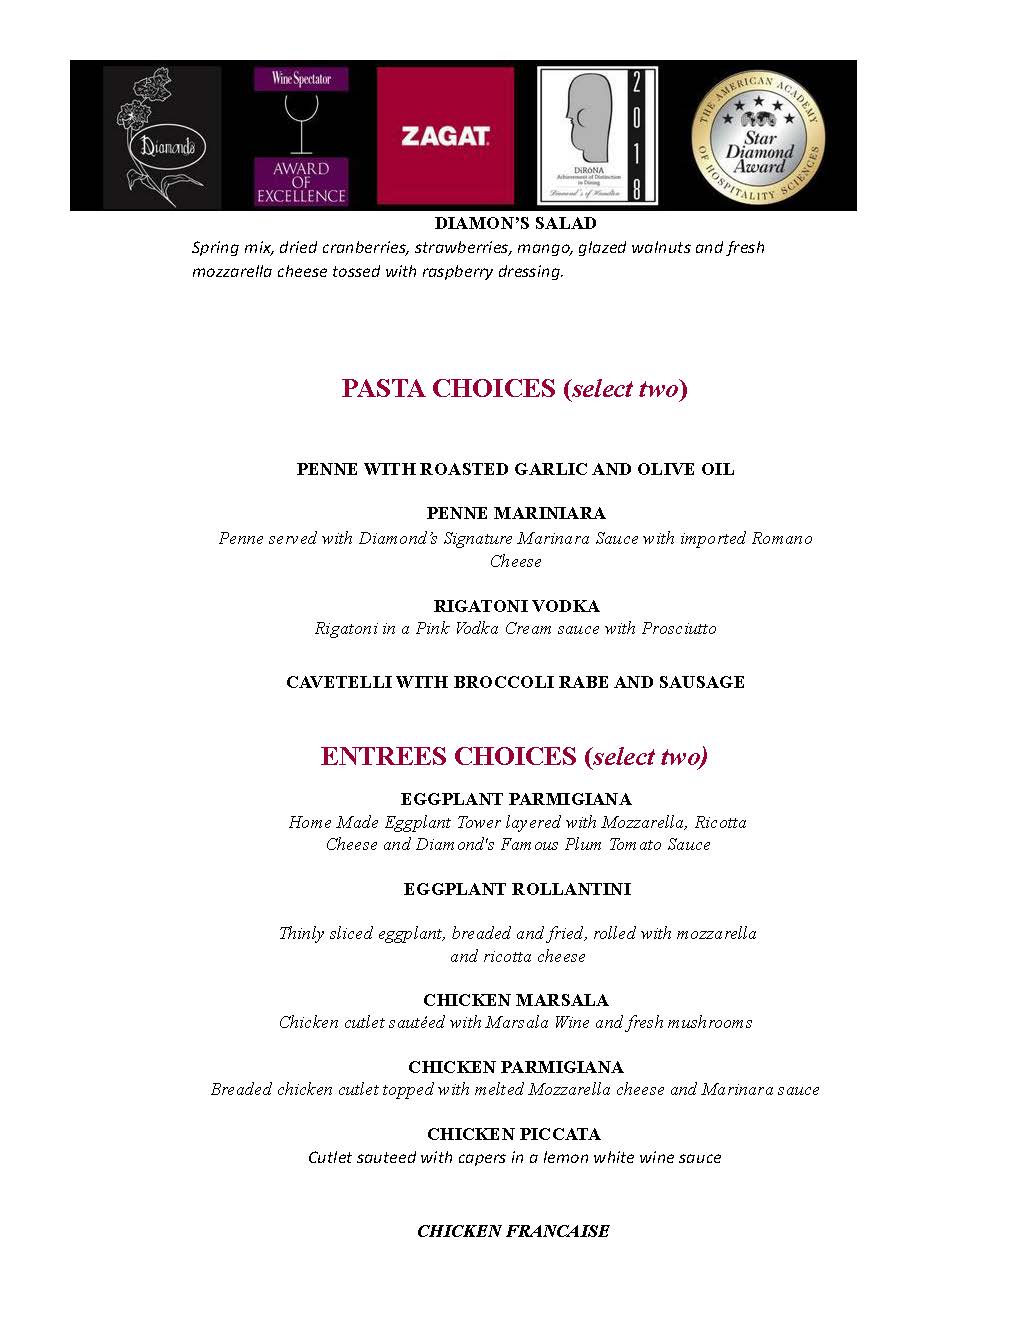 Menu featuring various pasta dishes and ingredients, offering selections like diamond’s salad, penne with roasted garlic, rigatoni with broccoli rabe, eggplant rollatini, and chicken parmigiana.